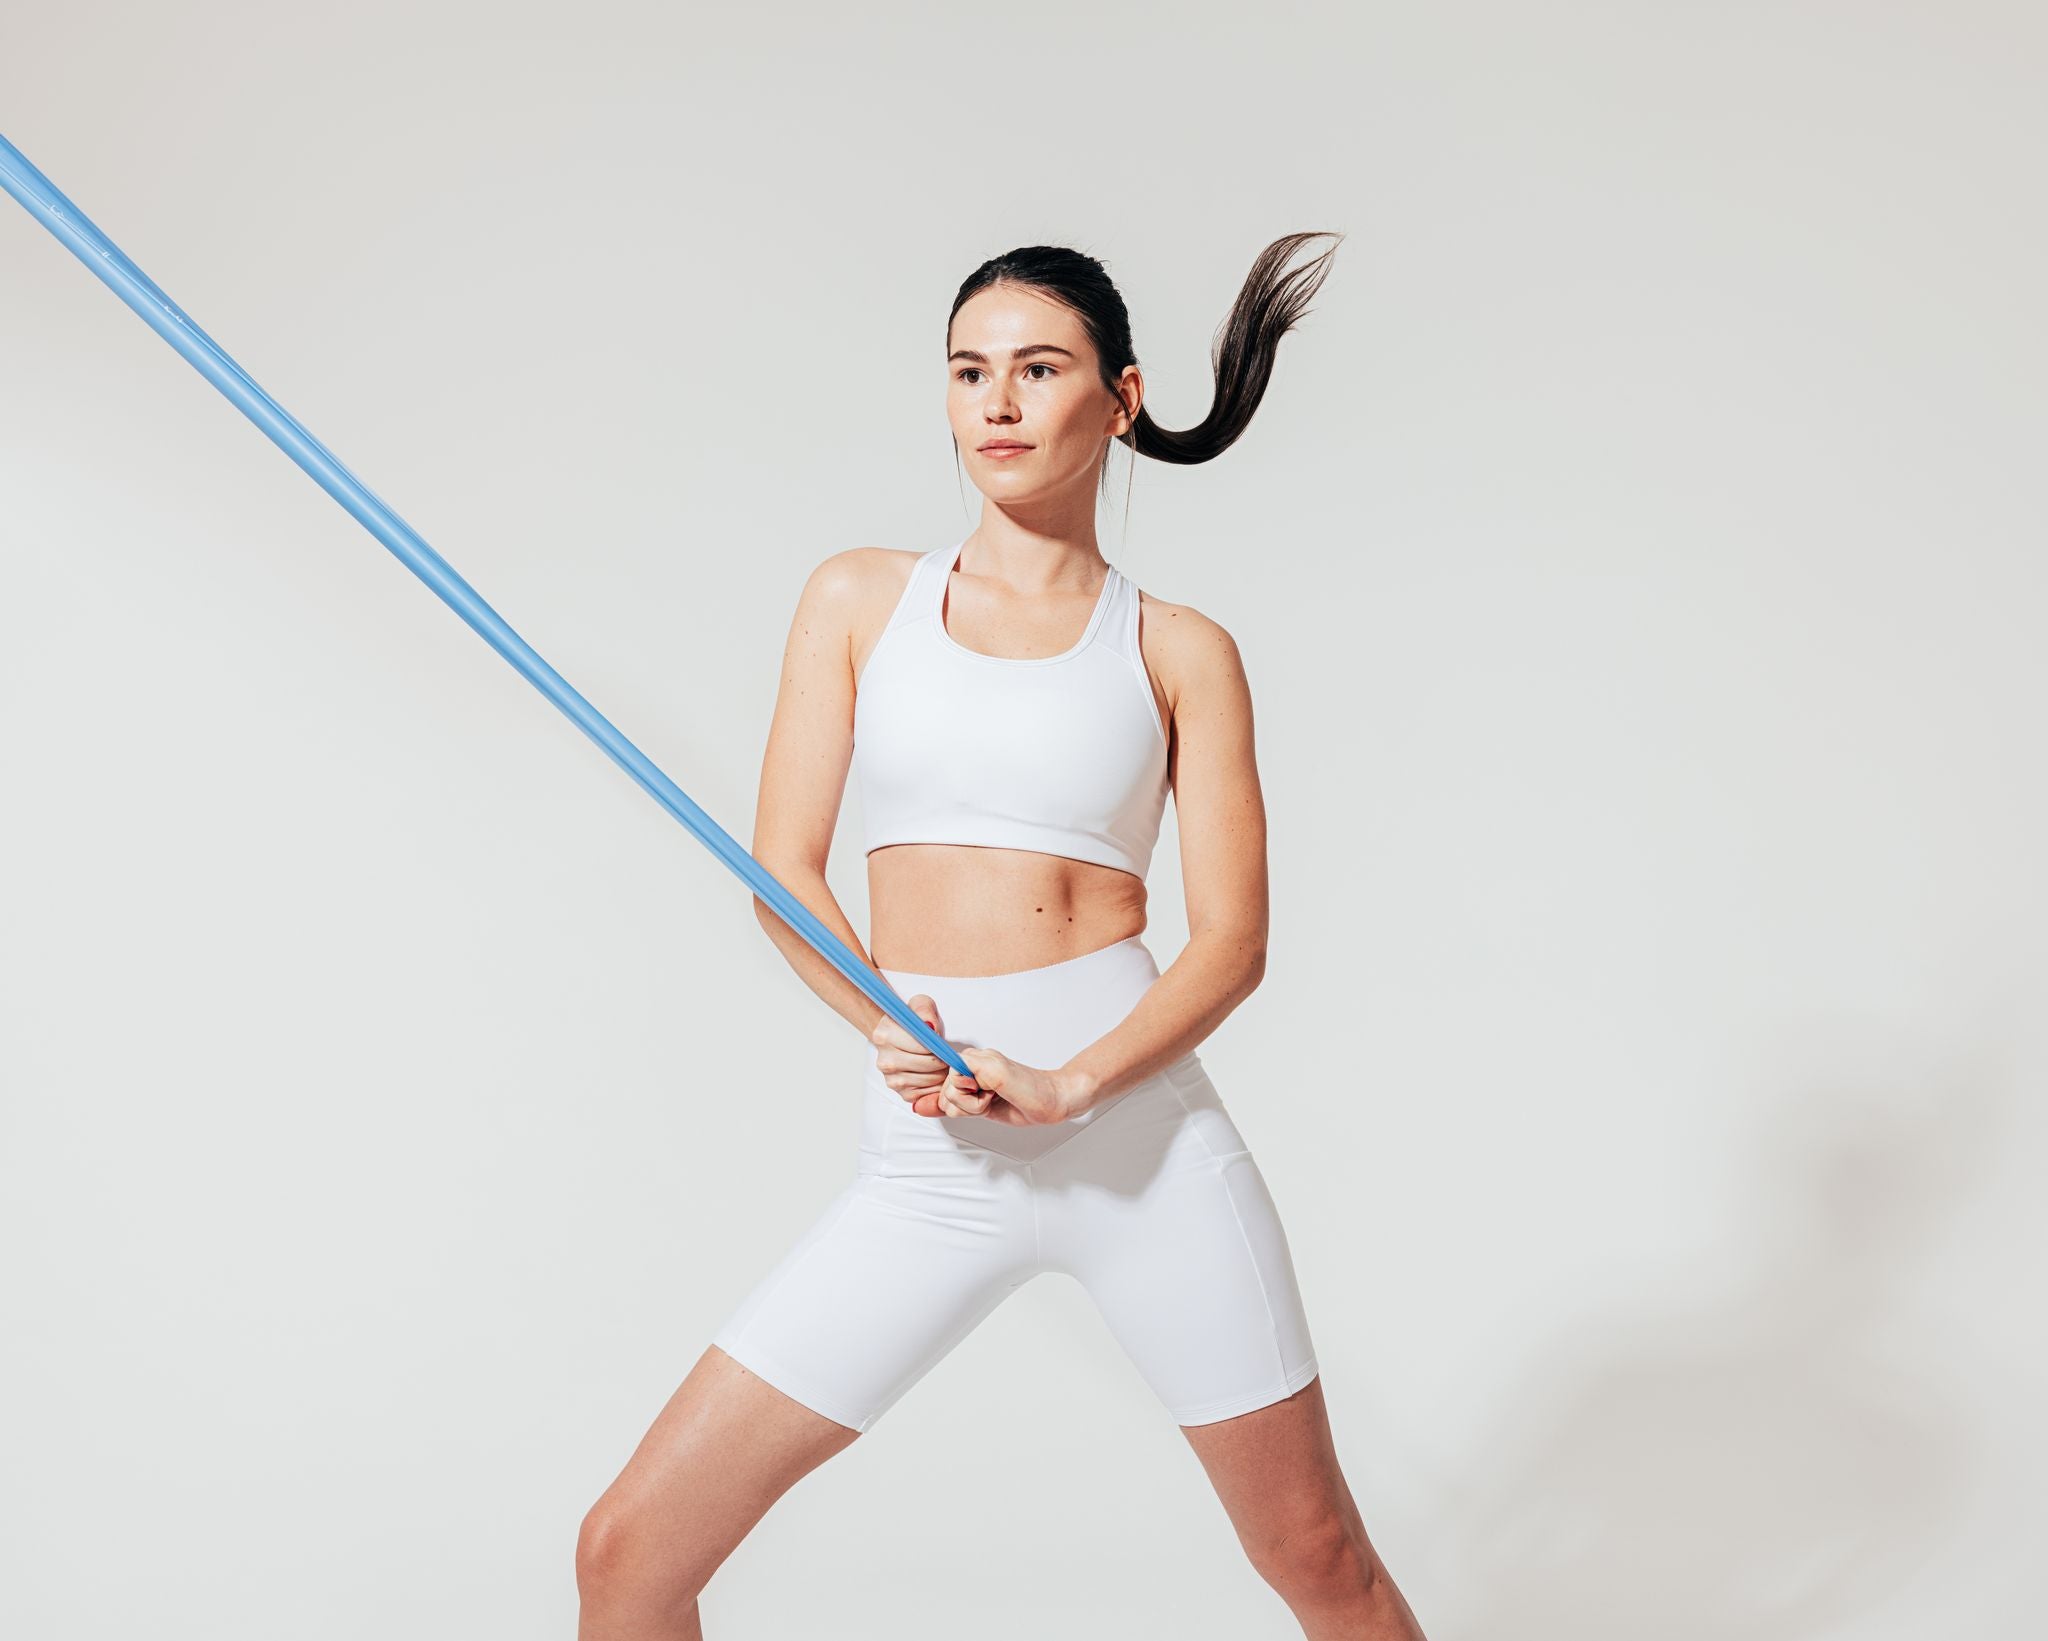 Train Like a Jedi: Here Are Star Wars-Inspired Home Workouts to Try